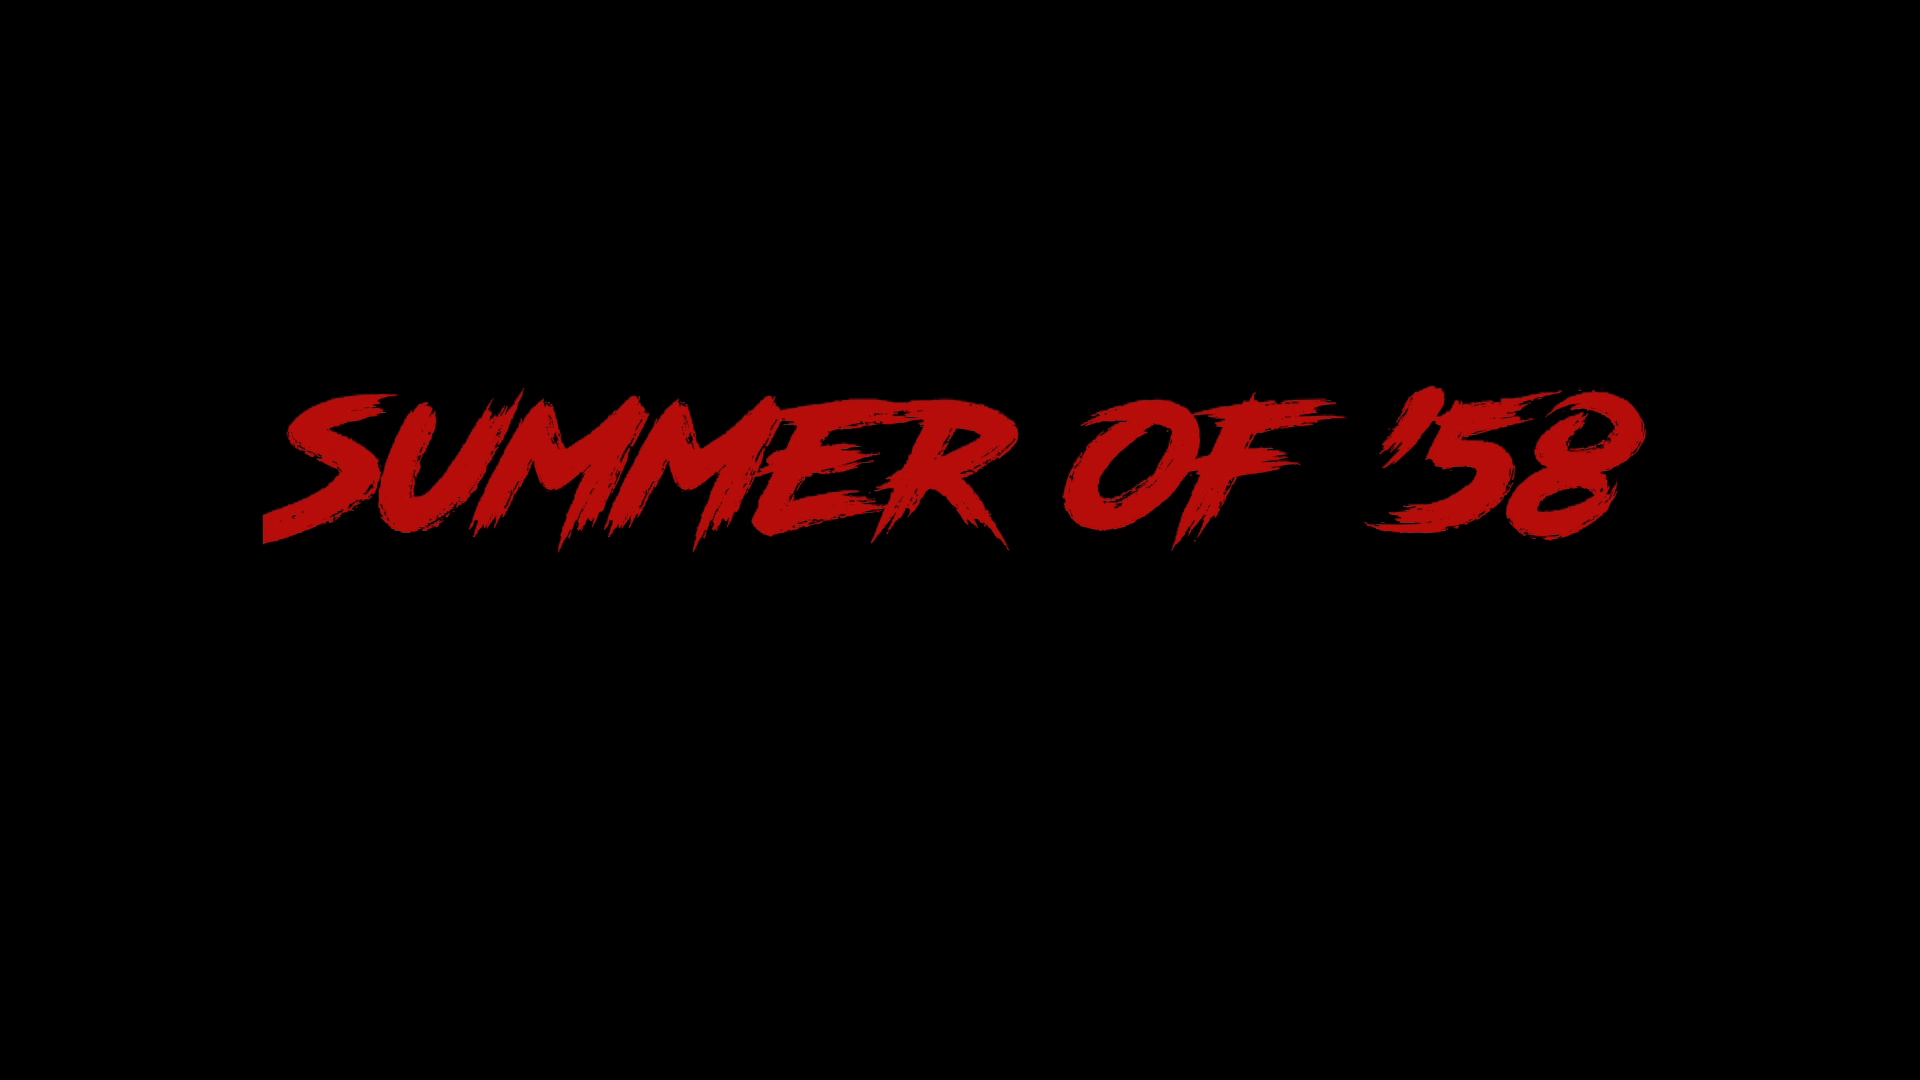 Let’s Play Summer of ’58 (Steam)